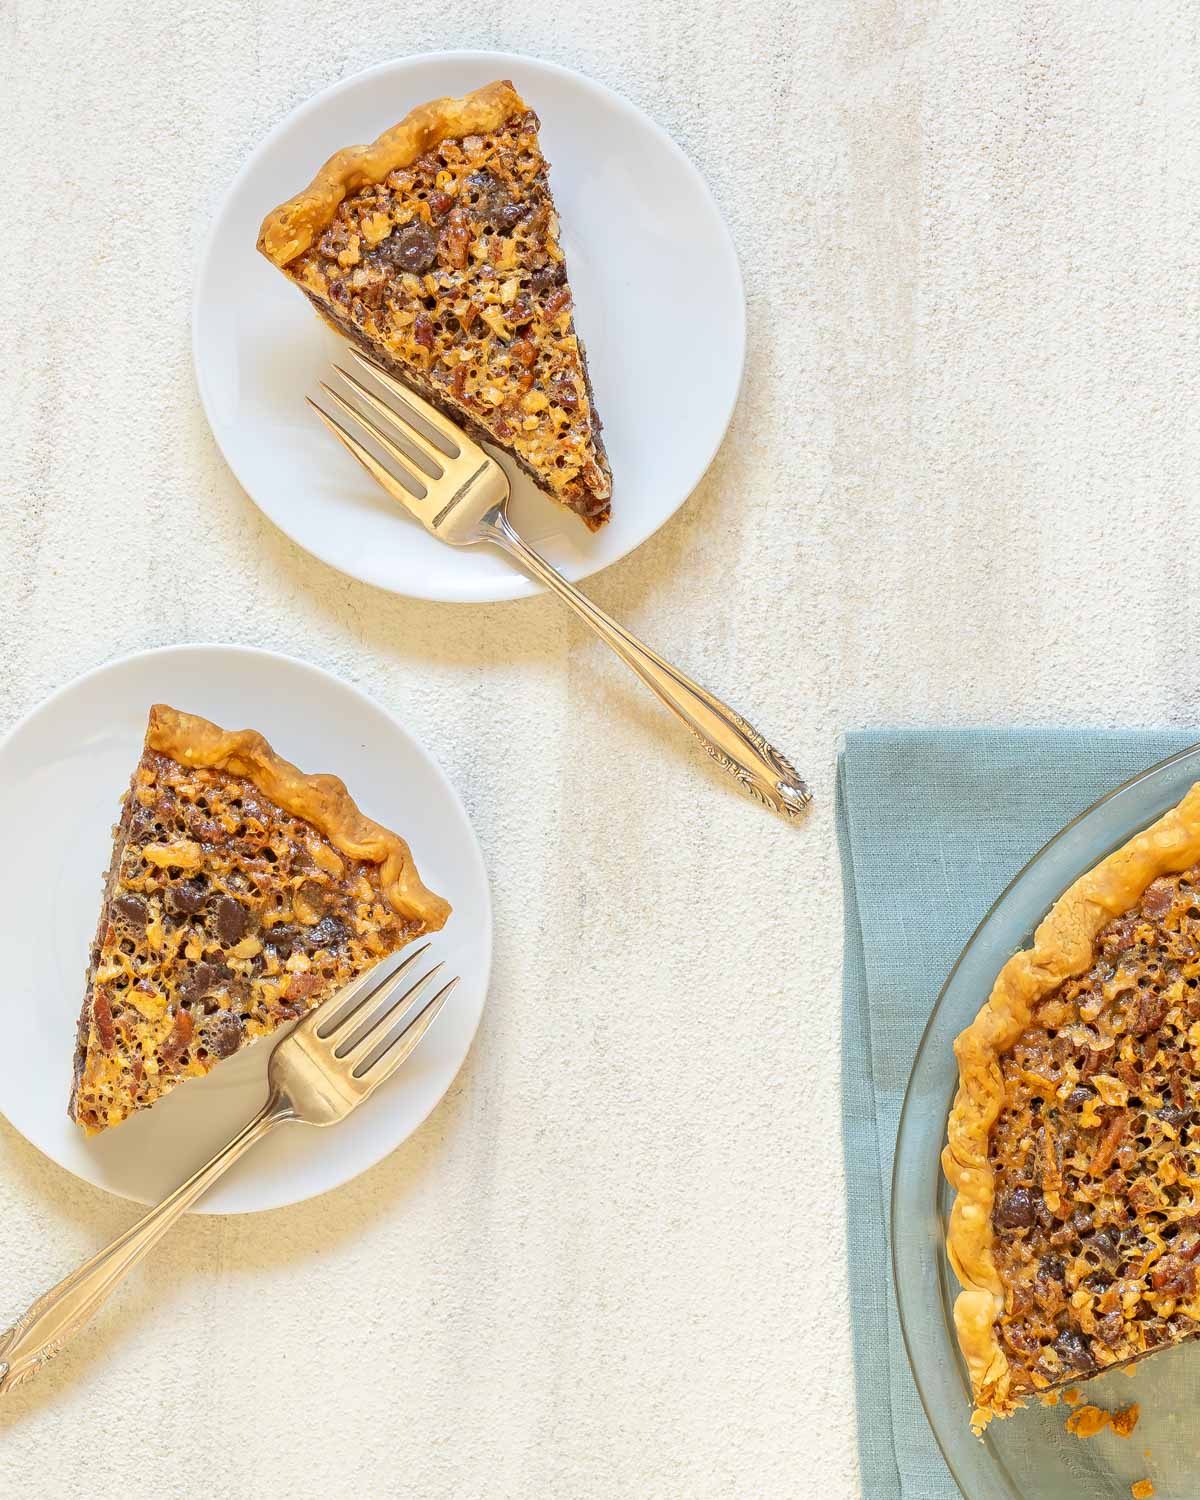 Homemade Chocolate Chip Pecan Pie has a flaky crust, luscious, gooey filling, and the perfect balance of sweet and nutty flavors. A delightful variation on the traditional pecan pie, its perfect for the holiday season. Try it today and experience the difference! #seasonedkitchen #pecanpierecipe #chocolatepecanpie #makeaheaddessert #holidayrecipes #homemade